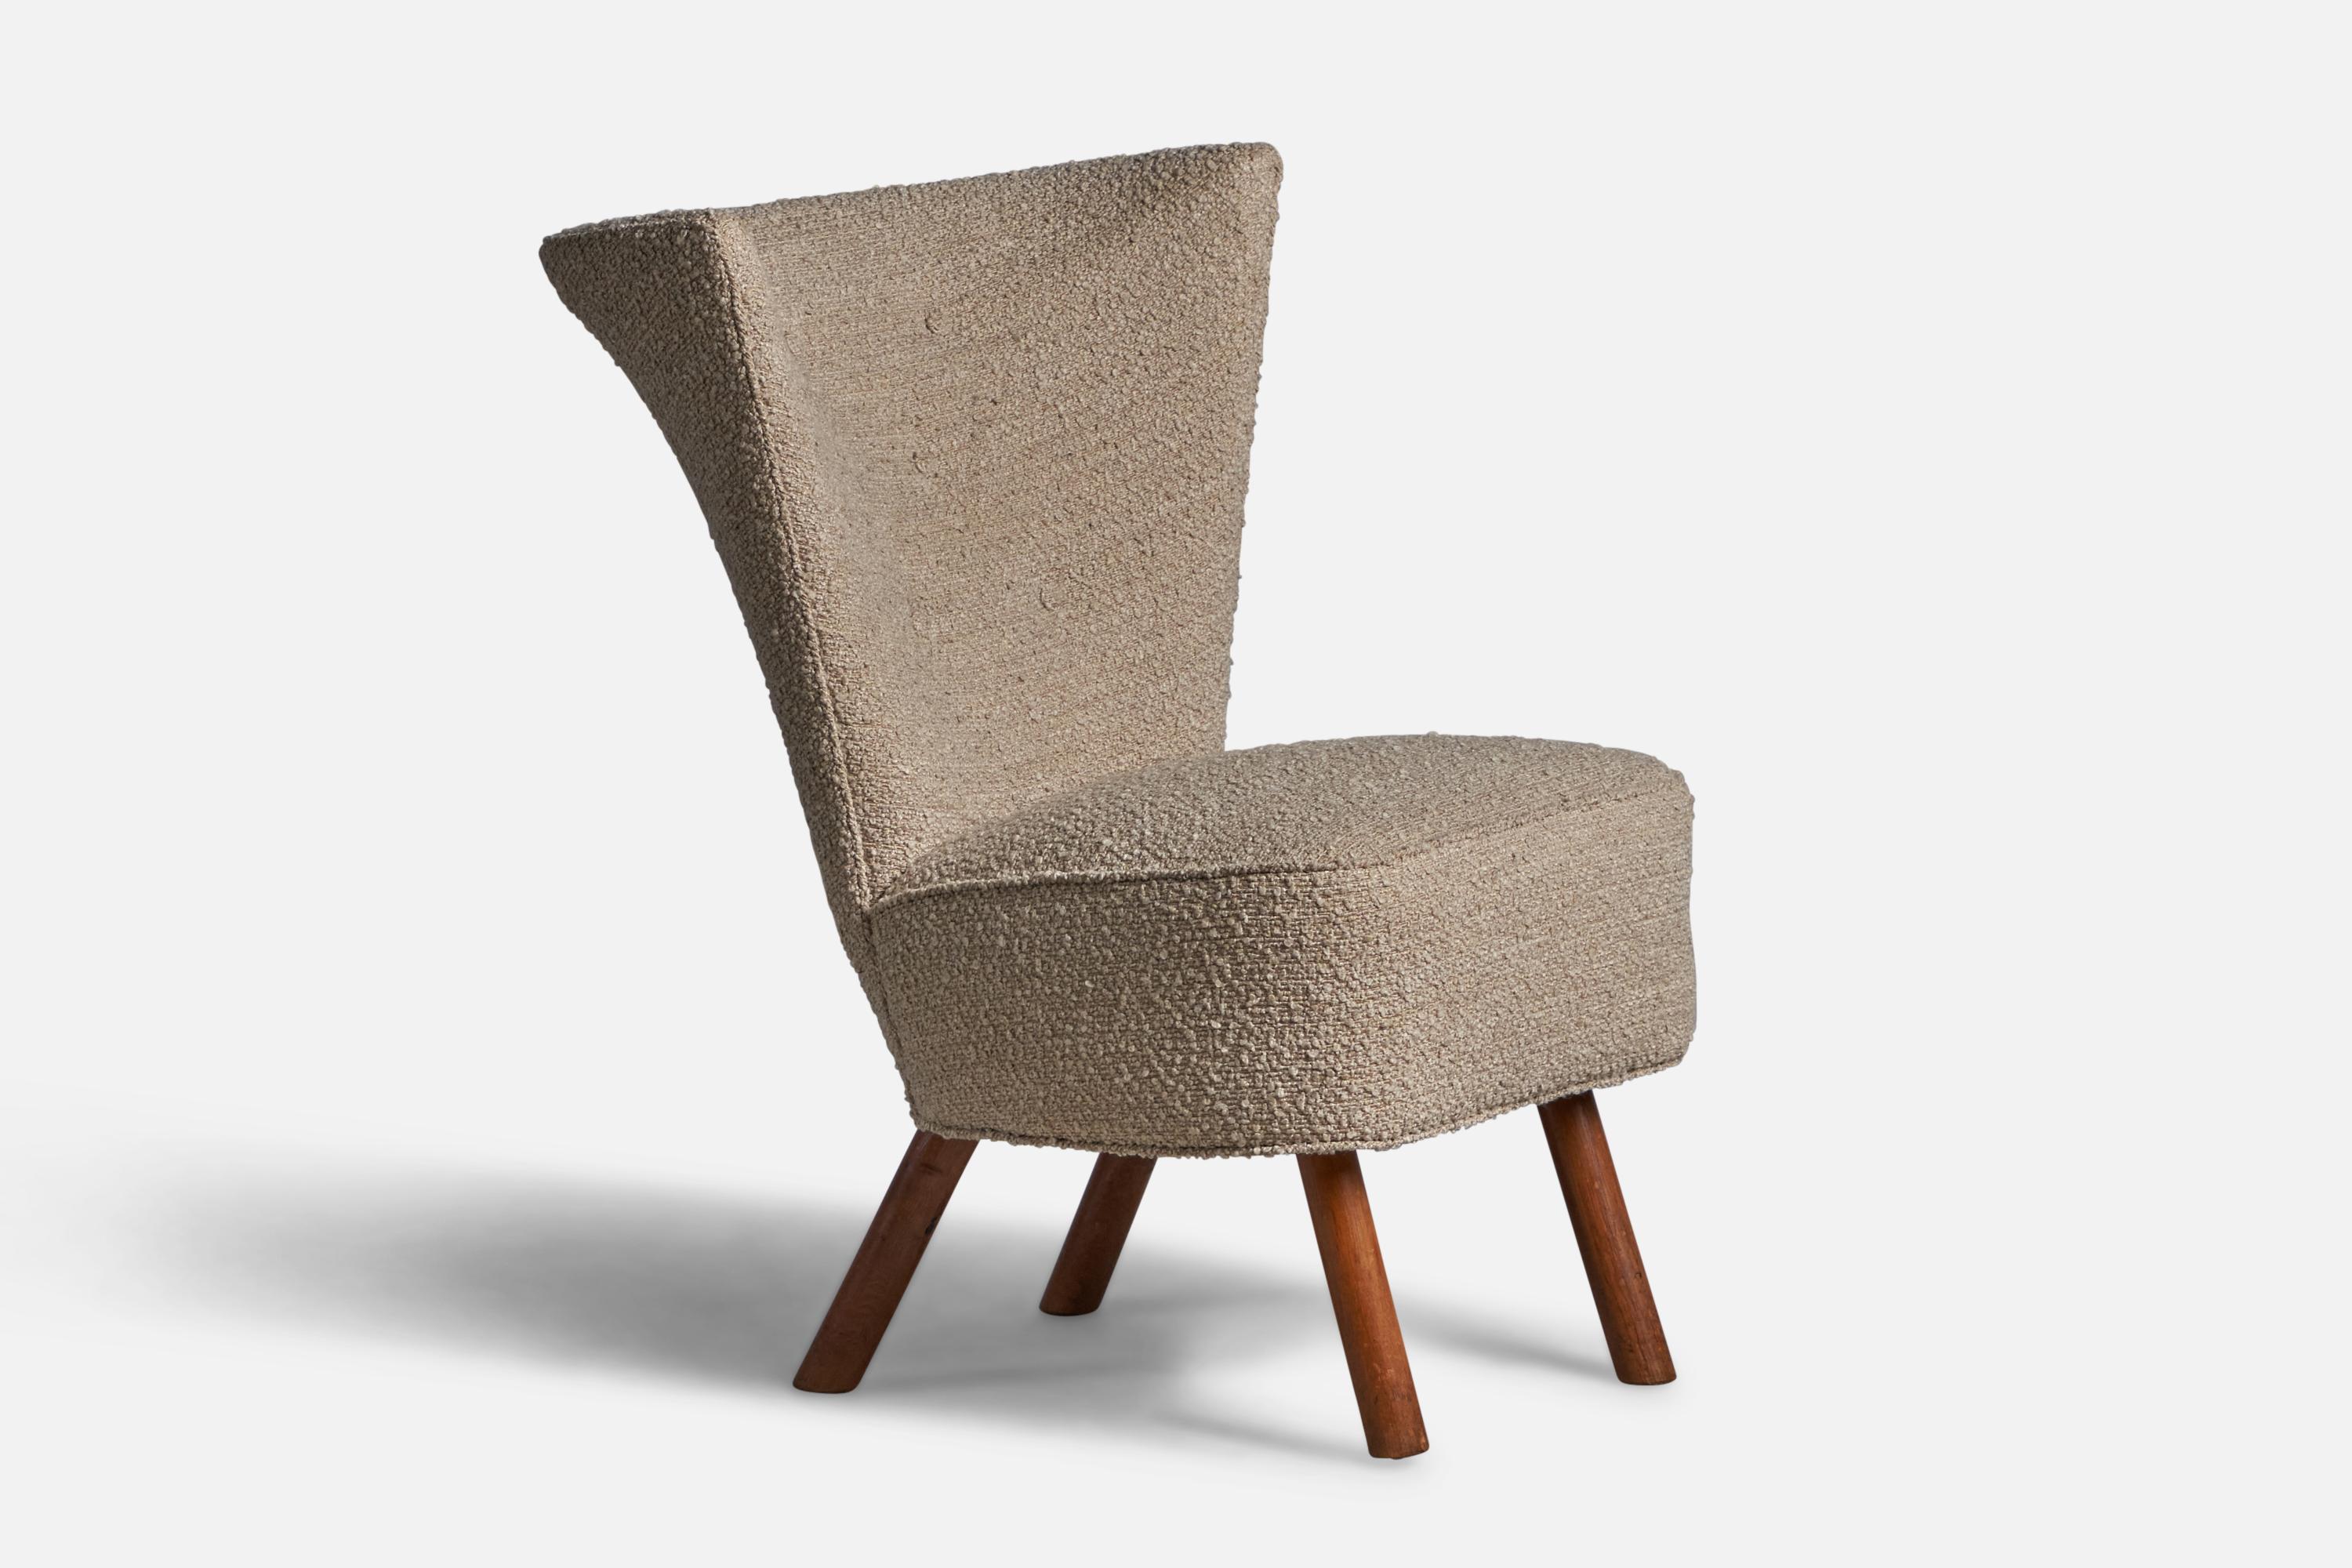 A beige bouclé fabric and wood slipper lounge chair, designed and produced in Denmark, 1940s.

17.5” seat height